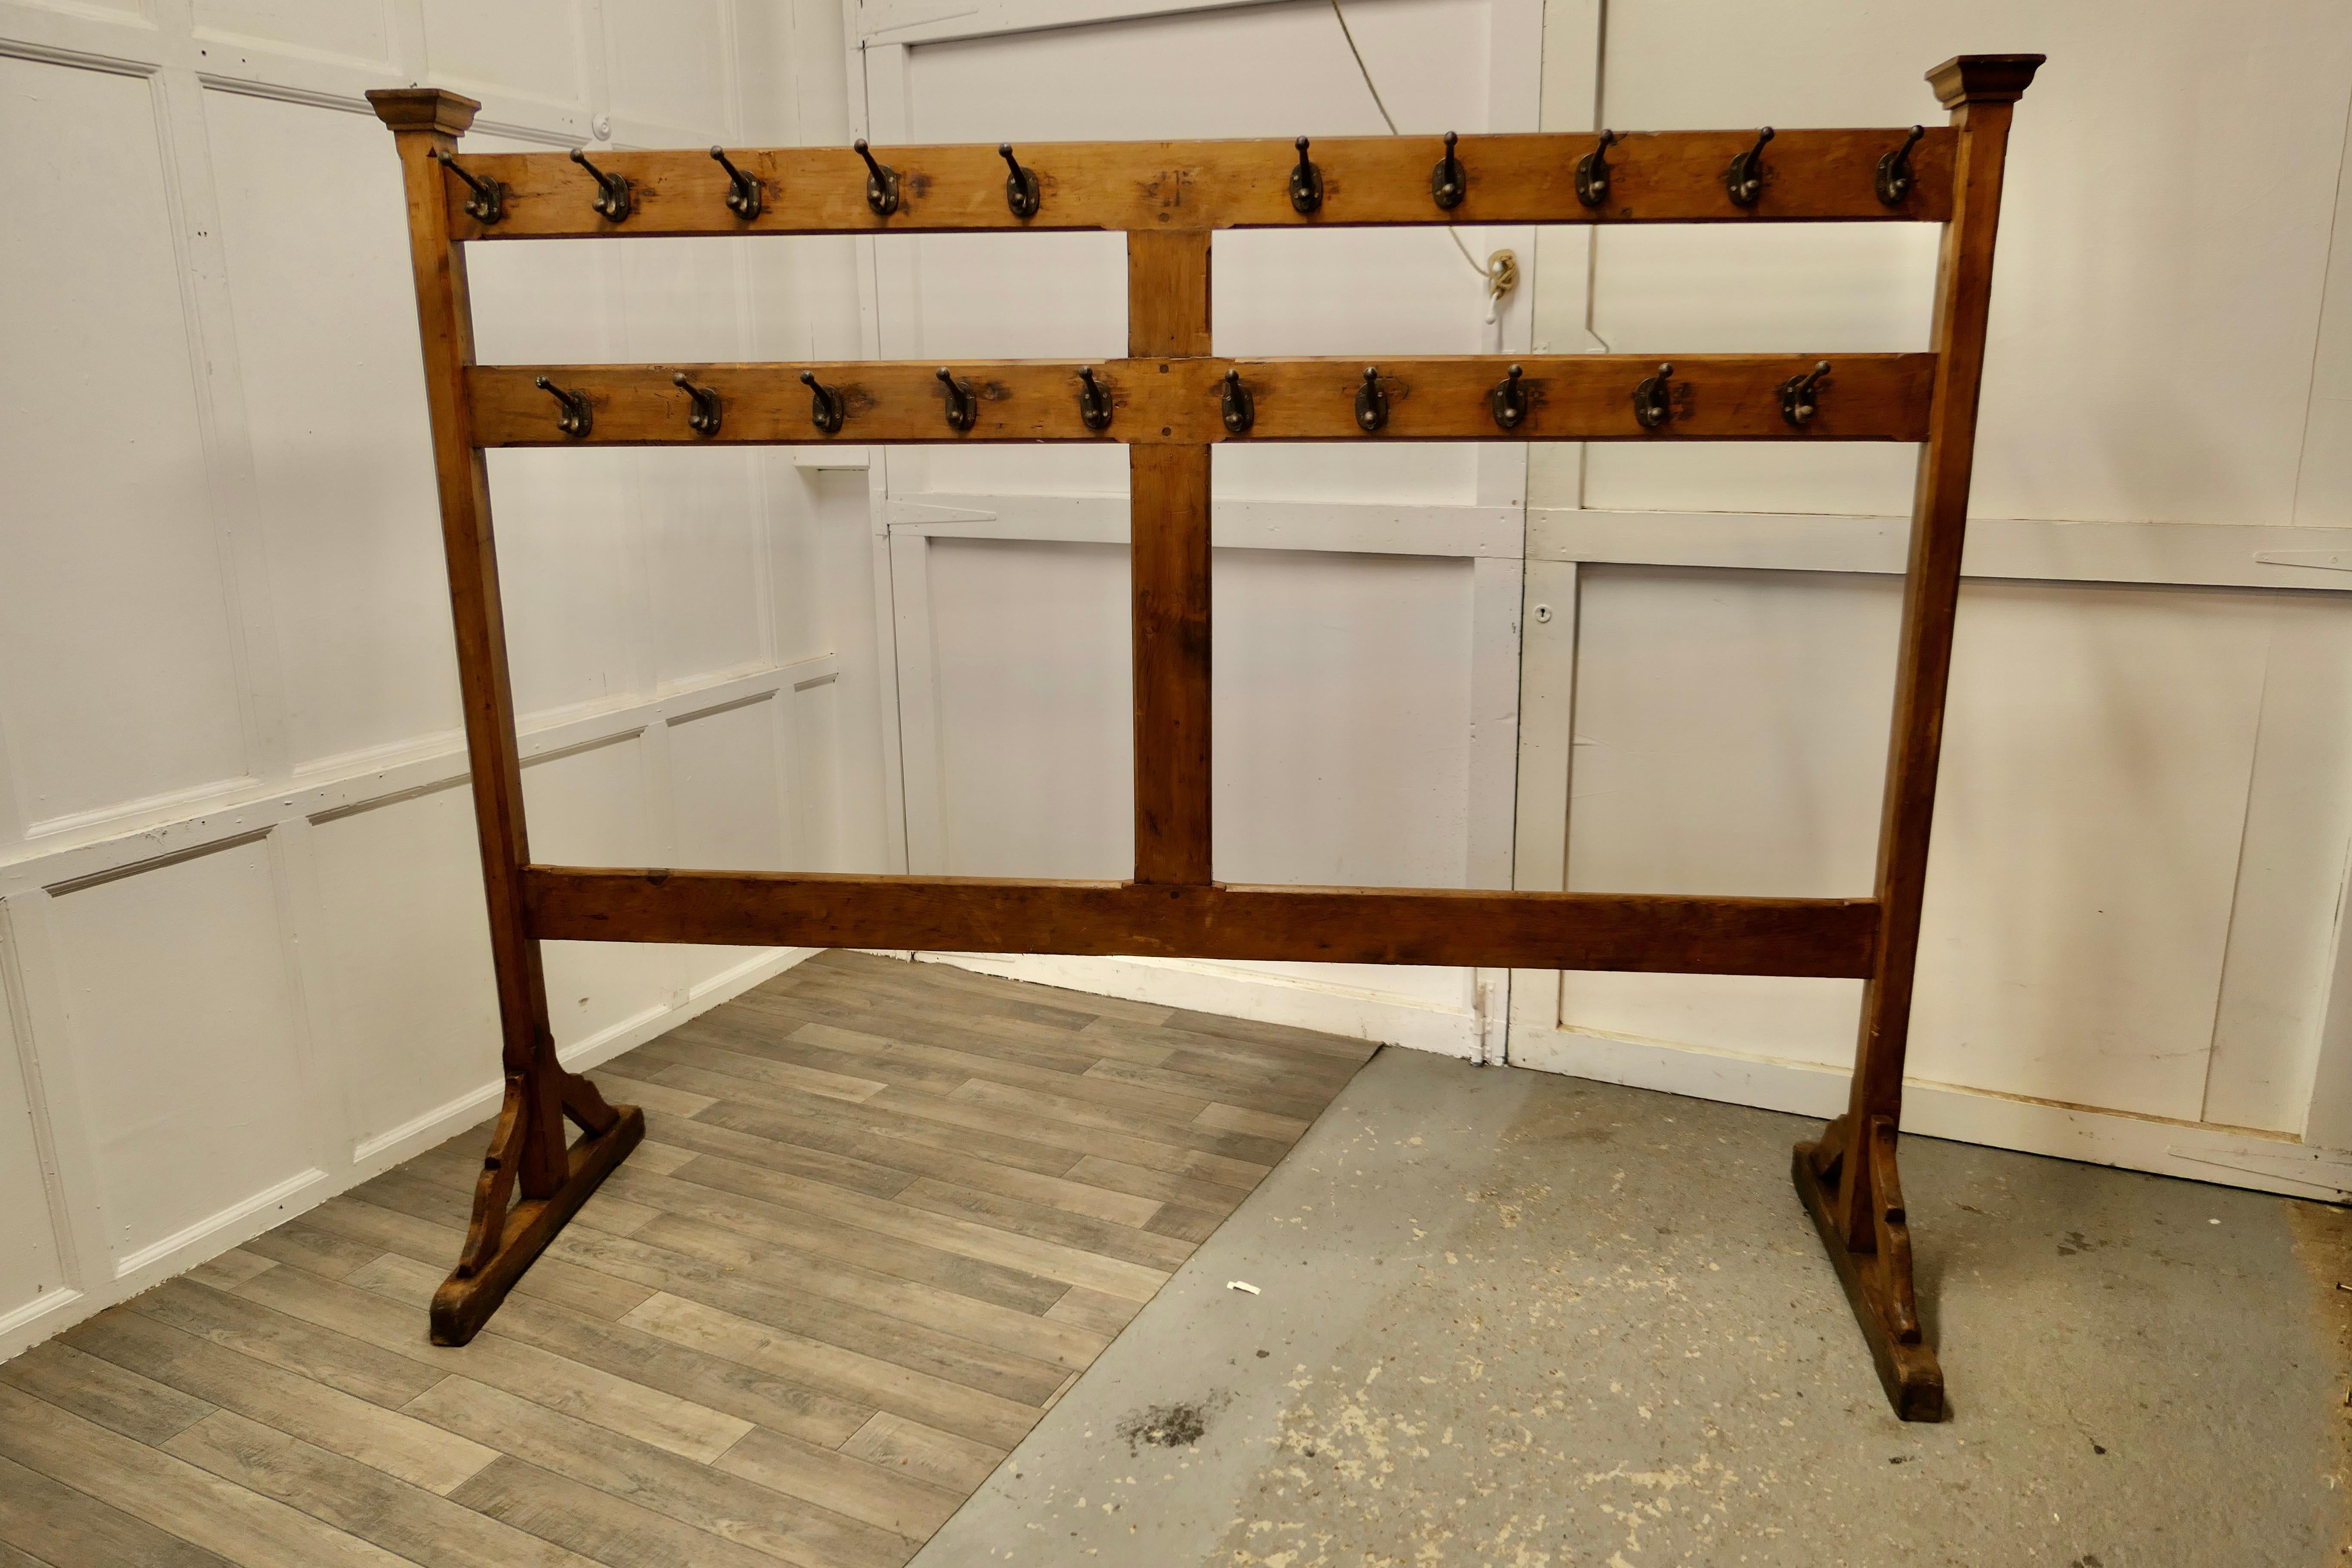 A large double sided Arts & Crafts golden pine clothes rail 

The Cloakroom Rail is a College Gymnasium piece it has a total of 40 double iron clothes hooks, the frame is made in Golden Pitch Pine 
The wood is chamfered in the Arts and Crafts